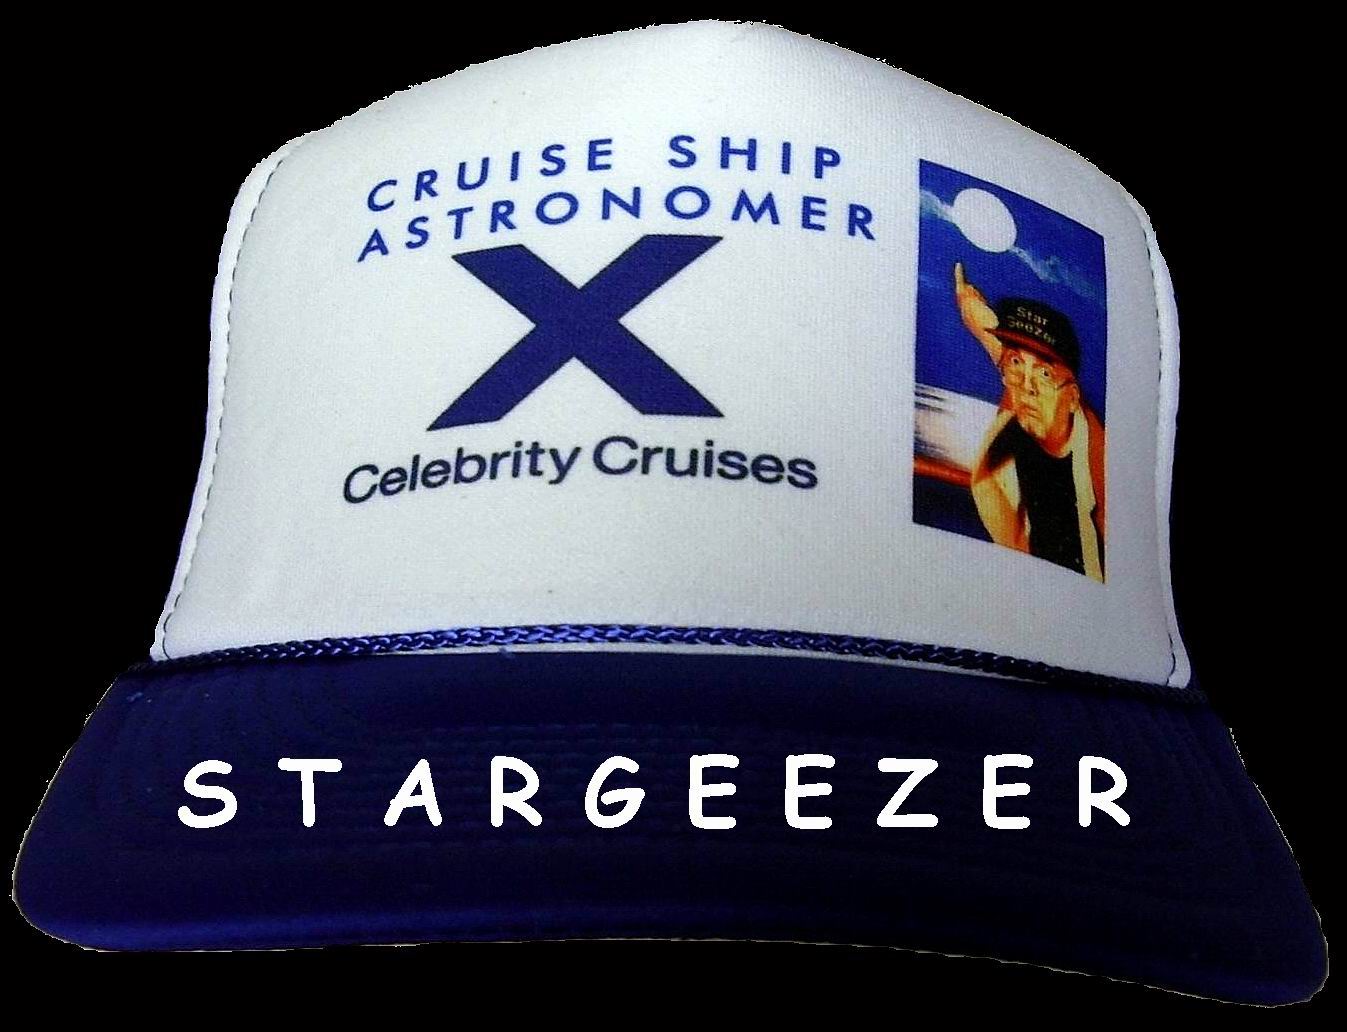 CRUISE ASTRONOMY EDUTAINER ( very hard work schedule ) GET UP EAT BREAKFAST LECTURE or PREP EAT LUNCH NAP EAT DINNER STARGAZE TIL MIDNITE.. But, someone's gotta do it !